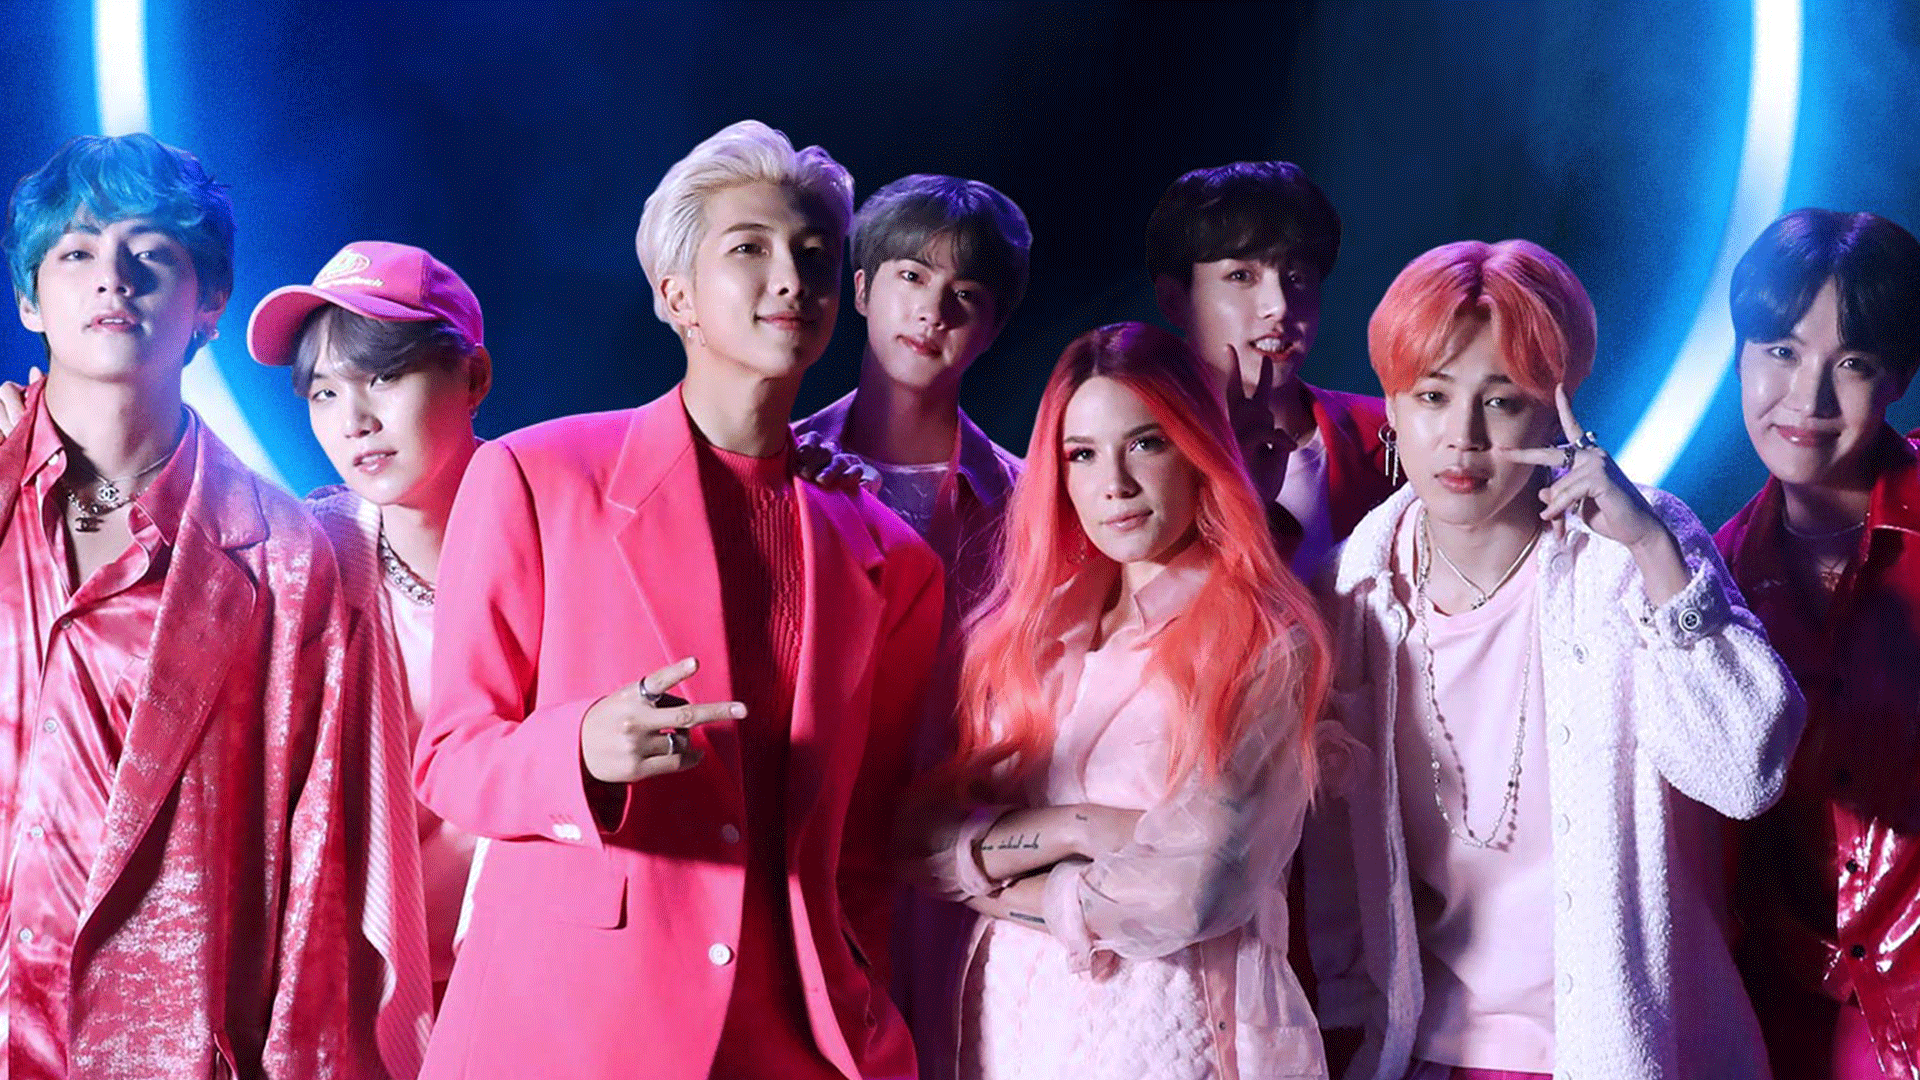 BTS and Halsey To Perform “Boy With Luv” at the 2019 BBMAs - dick ...